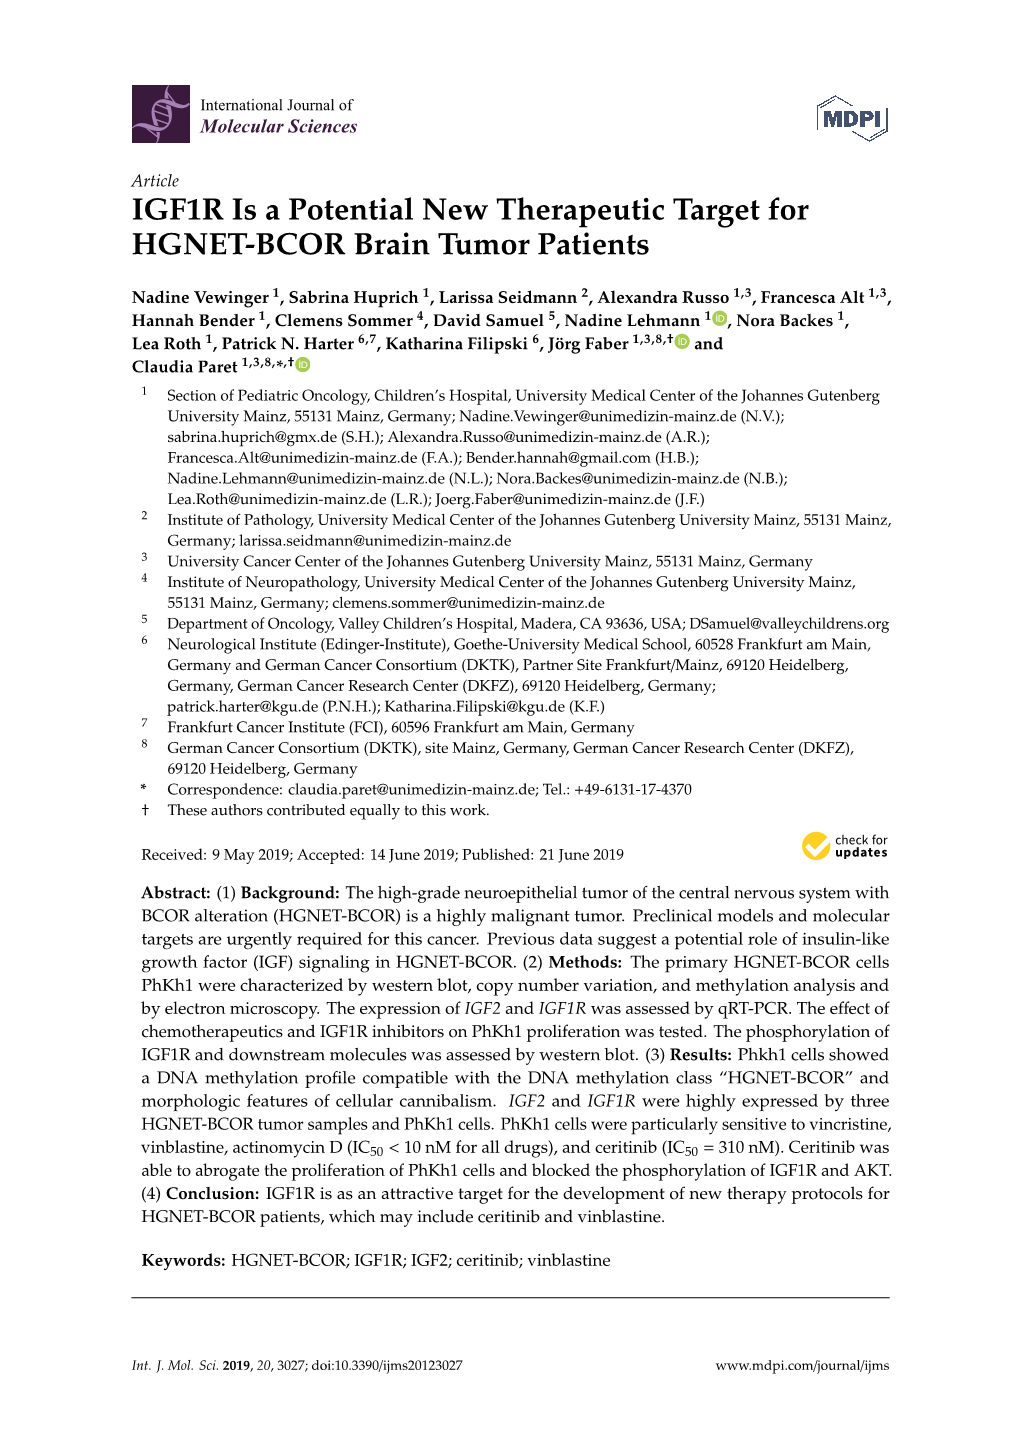 IGF1R Is a Potential New Therapeutic Target for HGNET-BCOR Brain Tumor Patients